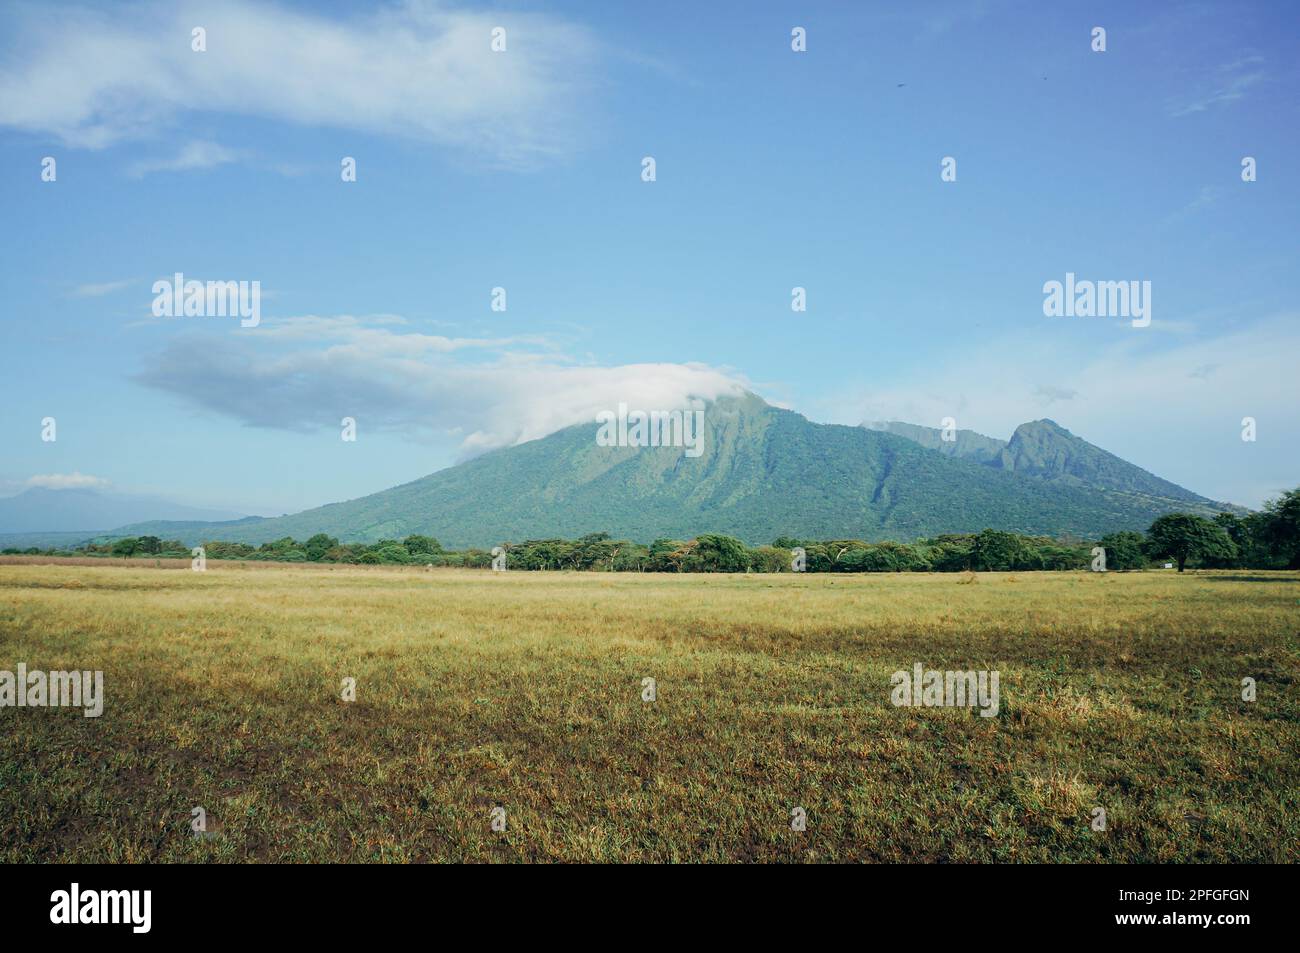 Panoramic view in the middle of Bekol savanna, Baluran National Park, Situbondo, Indonesia Stock Photo